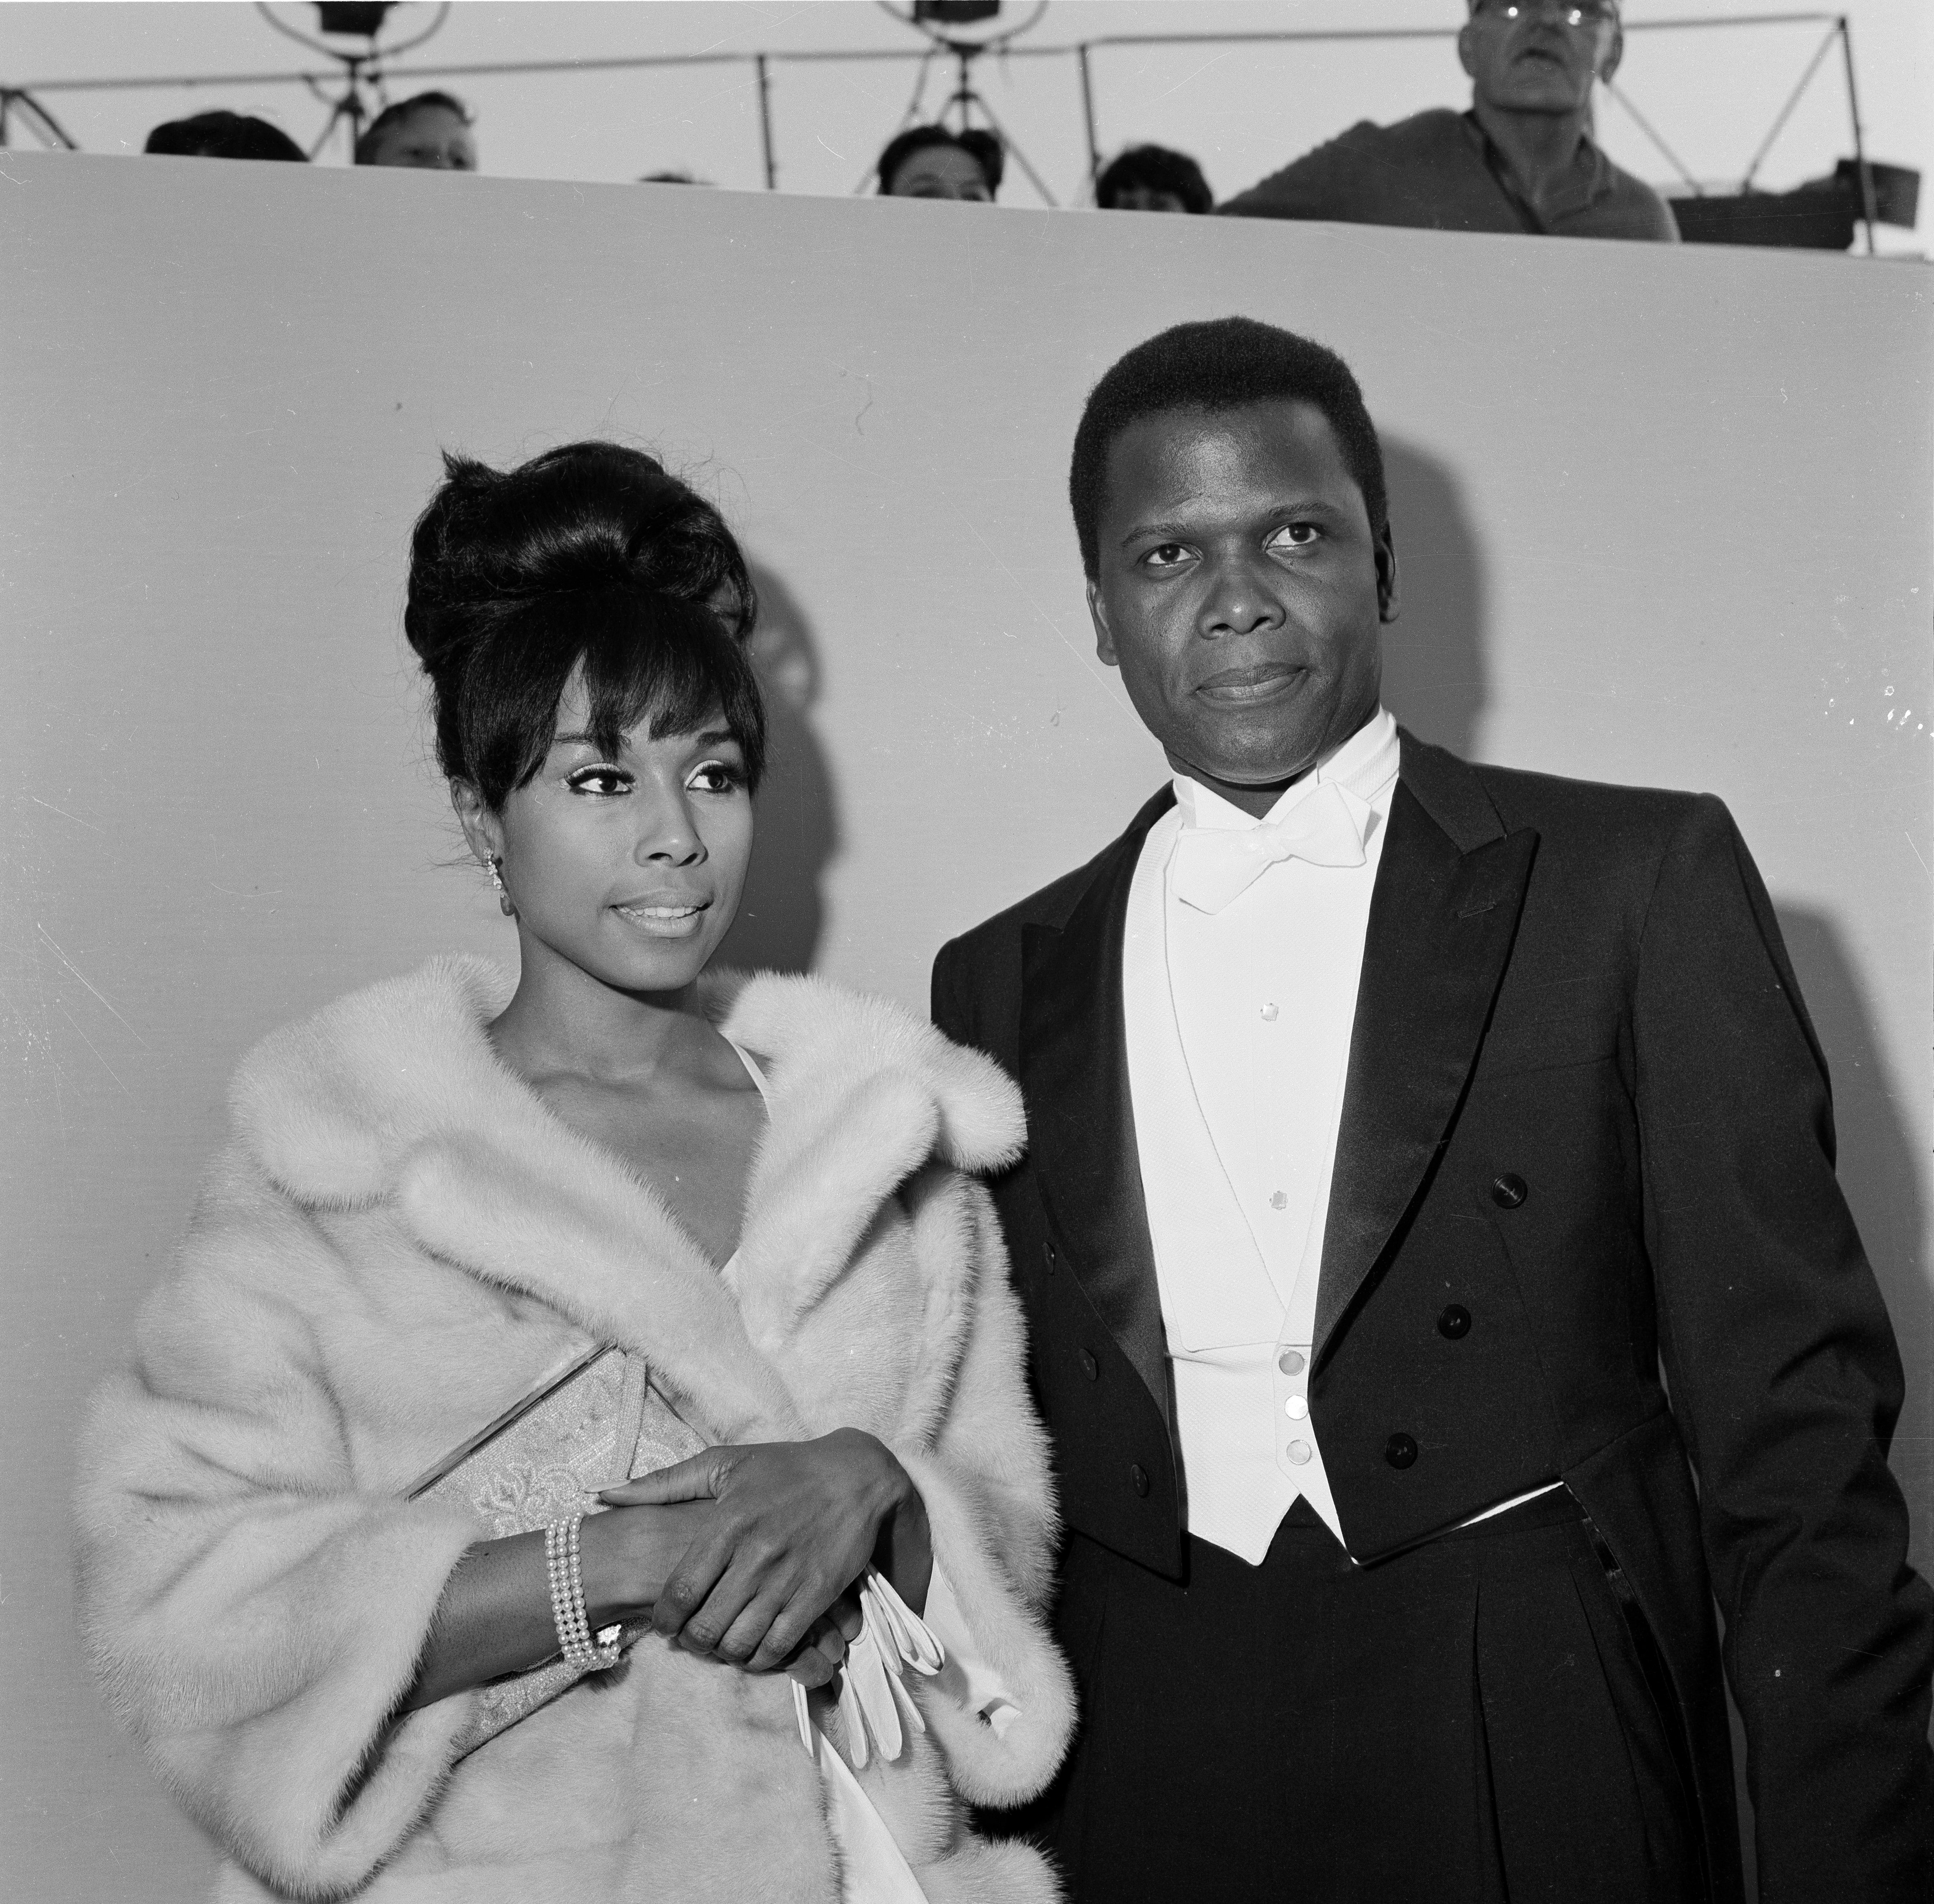 Sidney Poitier and Diahann Carroll at the 36th Academy Awards on April 13, 1964 in Santa Monica, California. | Photo: Getty Images